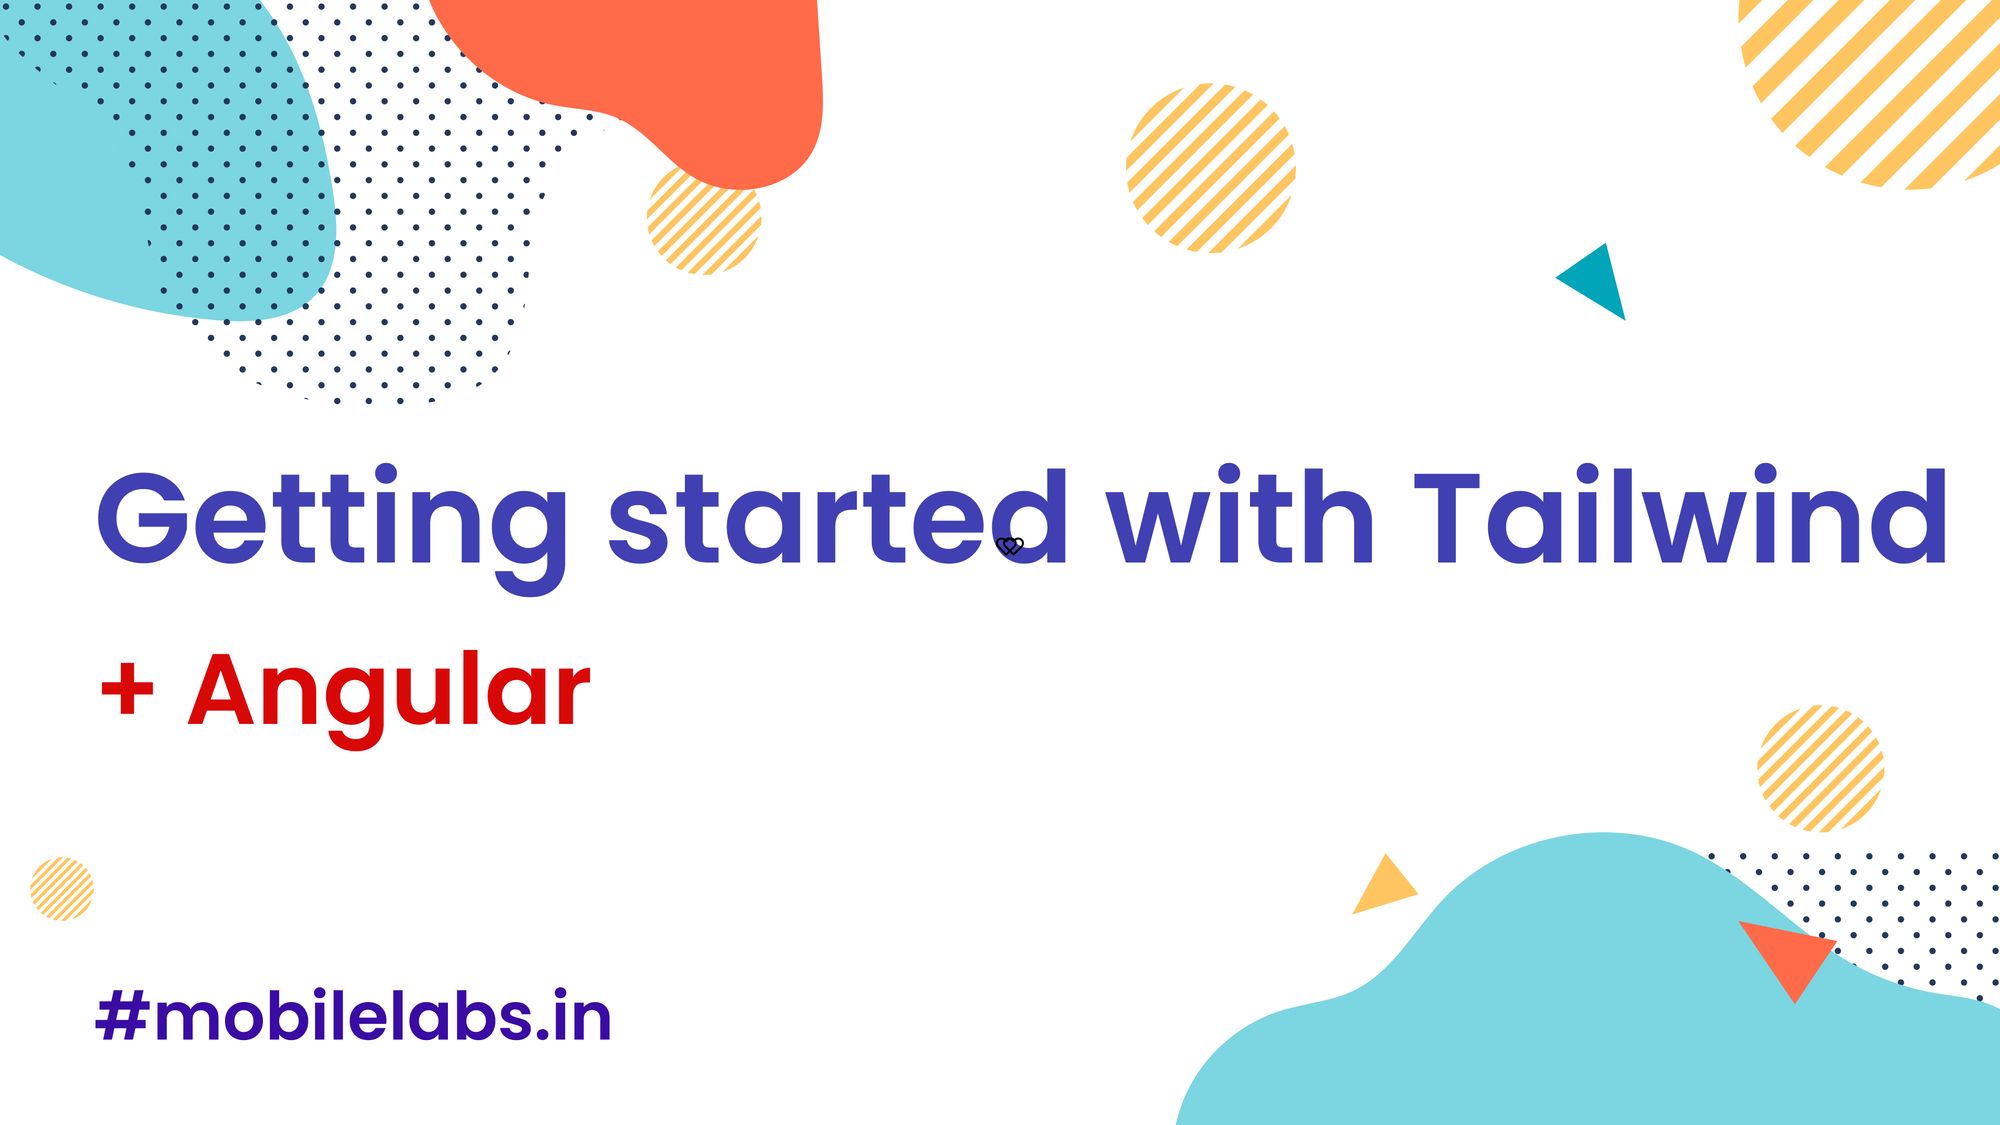 Getting started with Tailwind and Angular